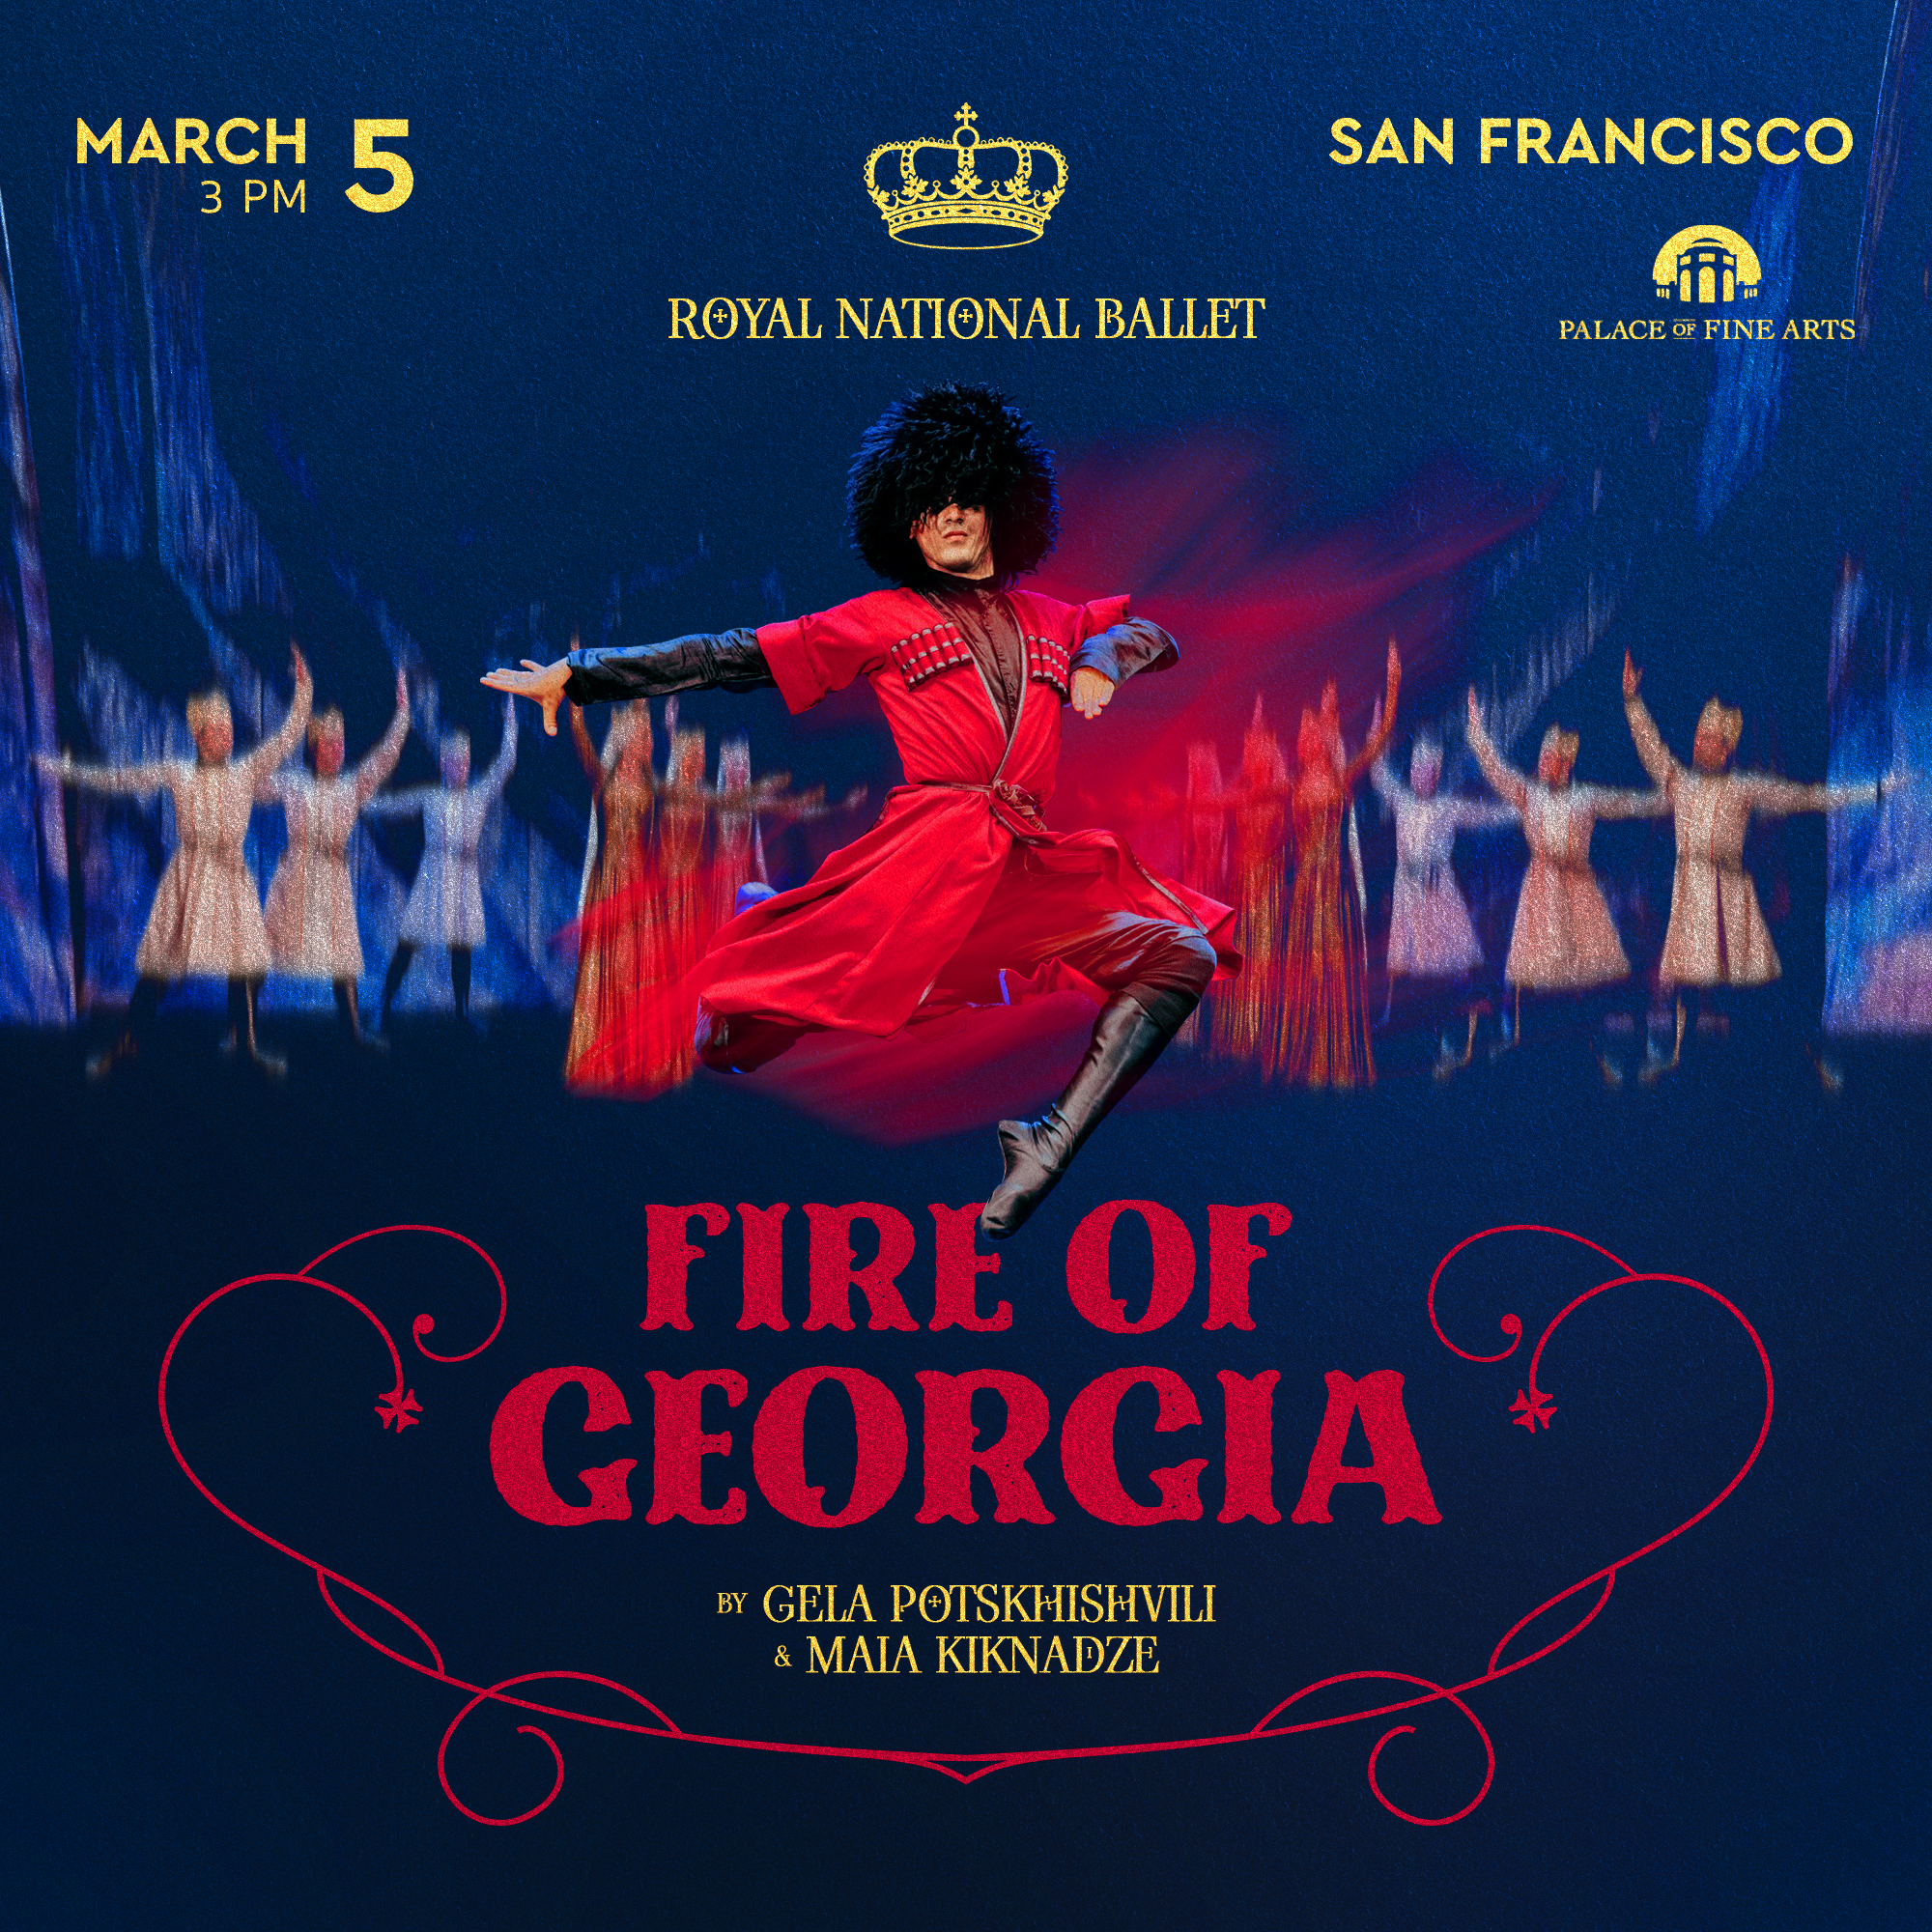 FIRE OF GEORGIA BY ROYAL NATIONAL BALLET